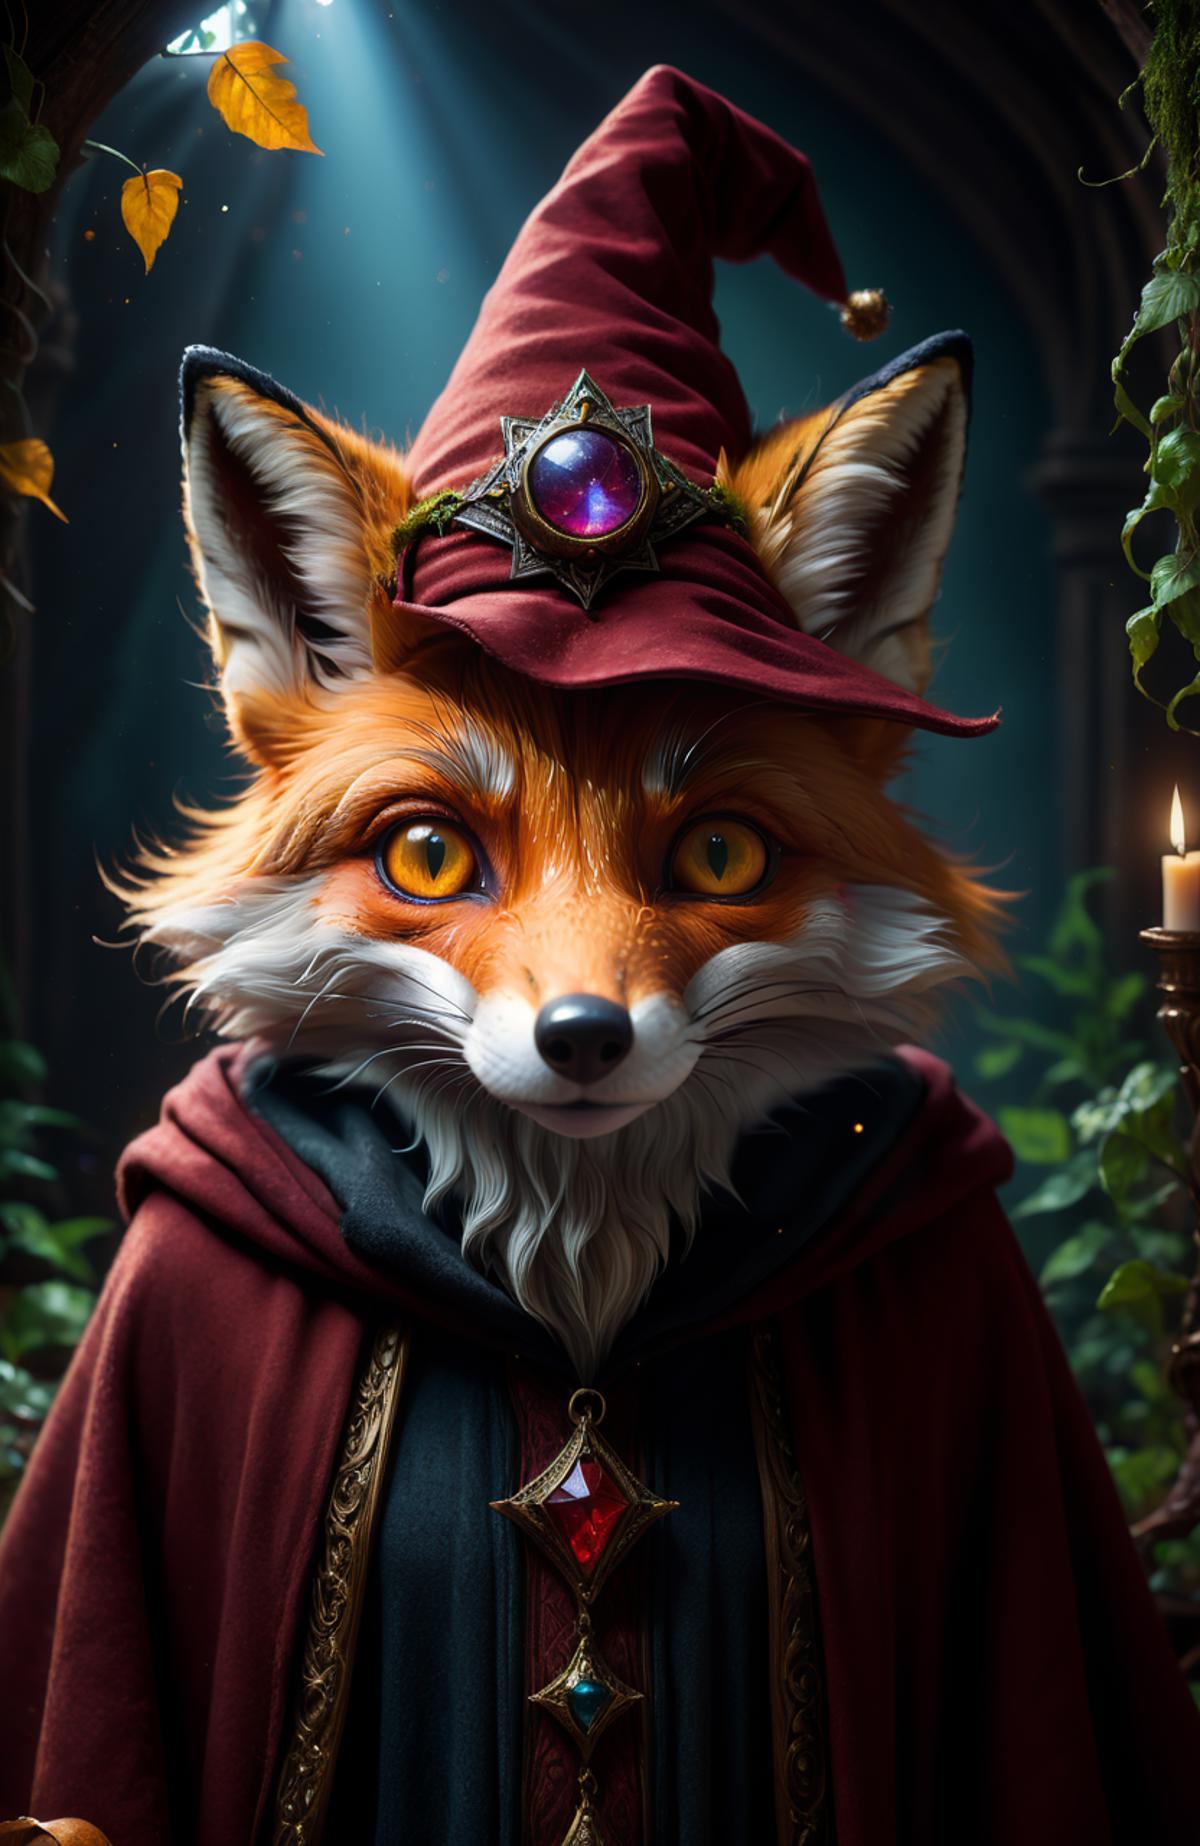 A fox wearing a wizard's hat and cape, standing in front of a green plant.